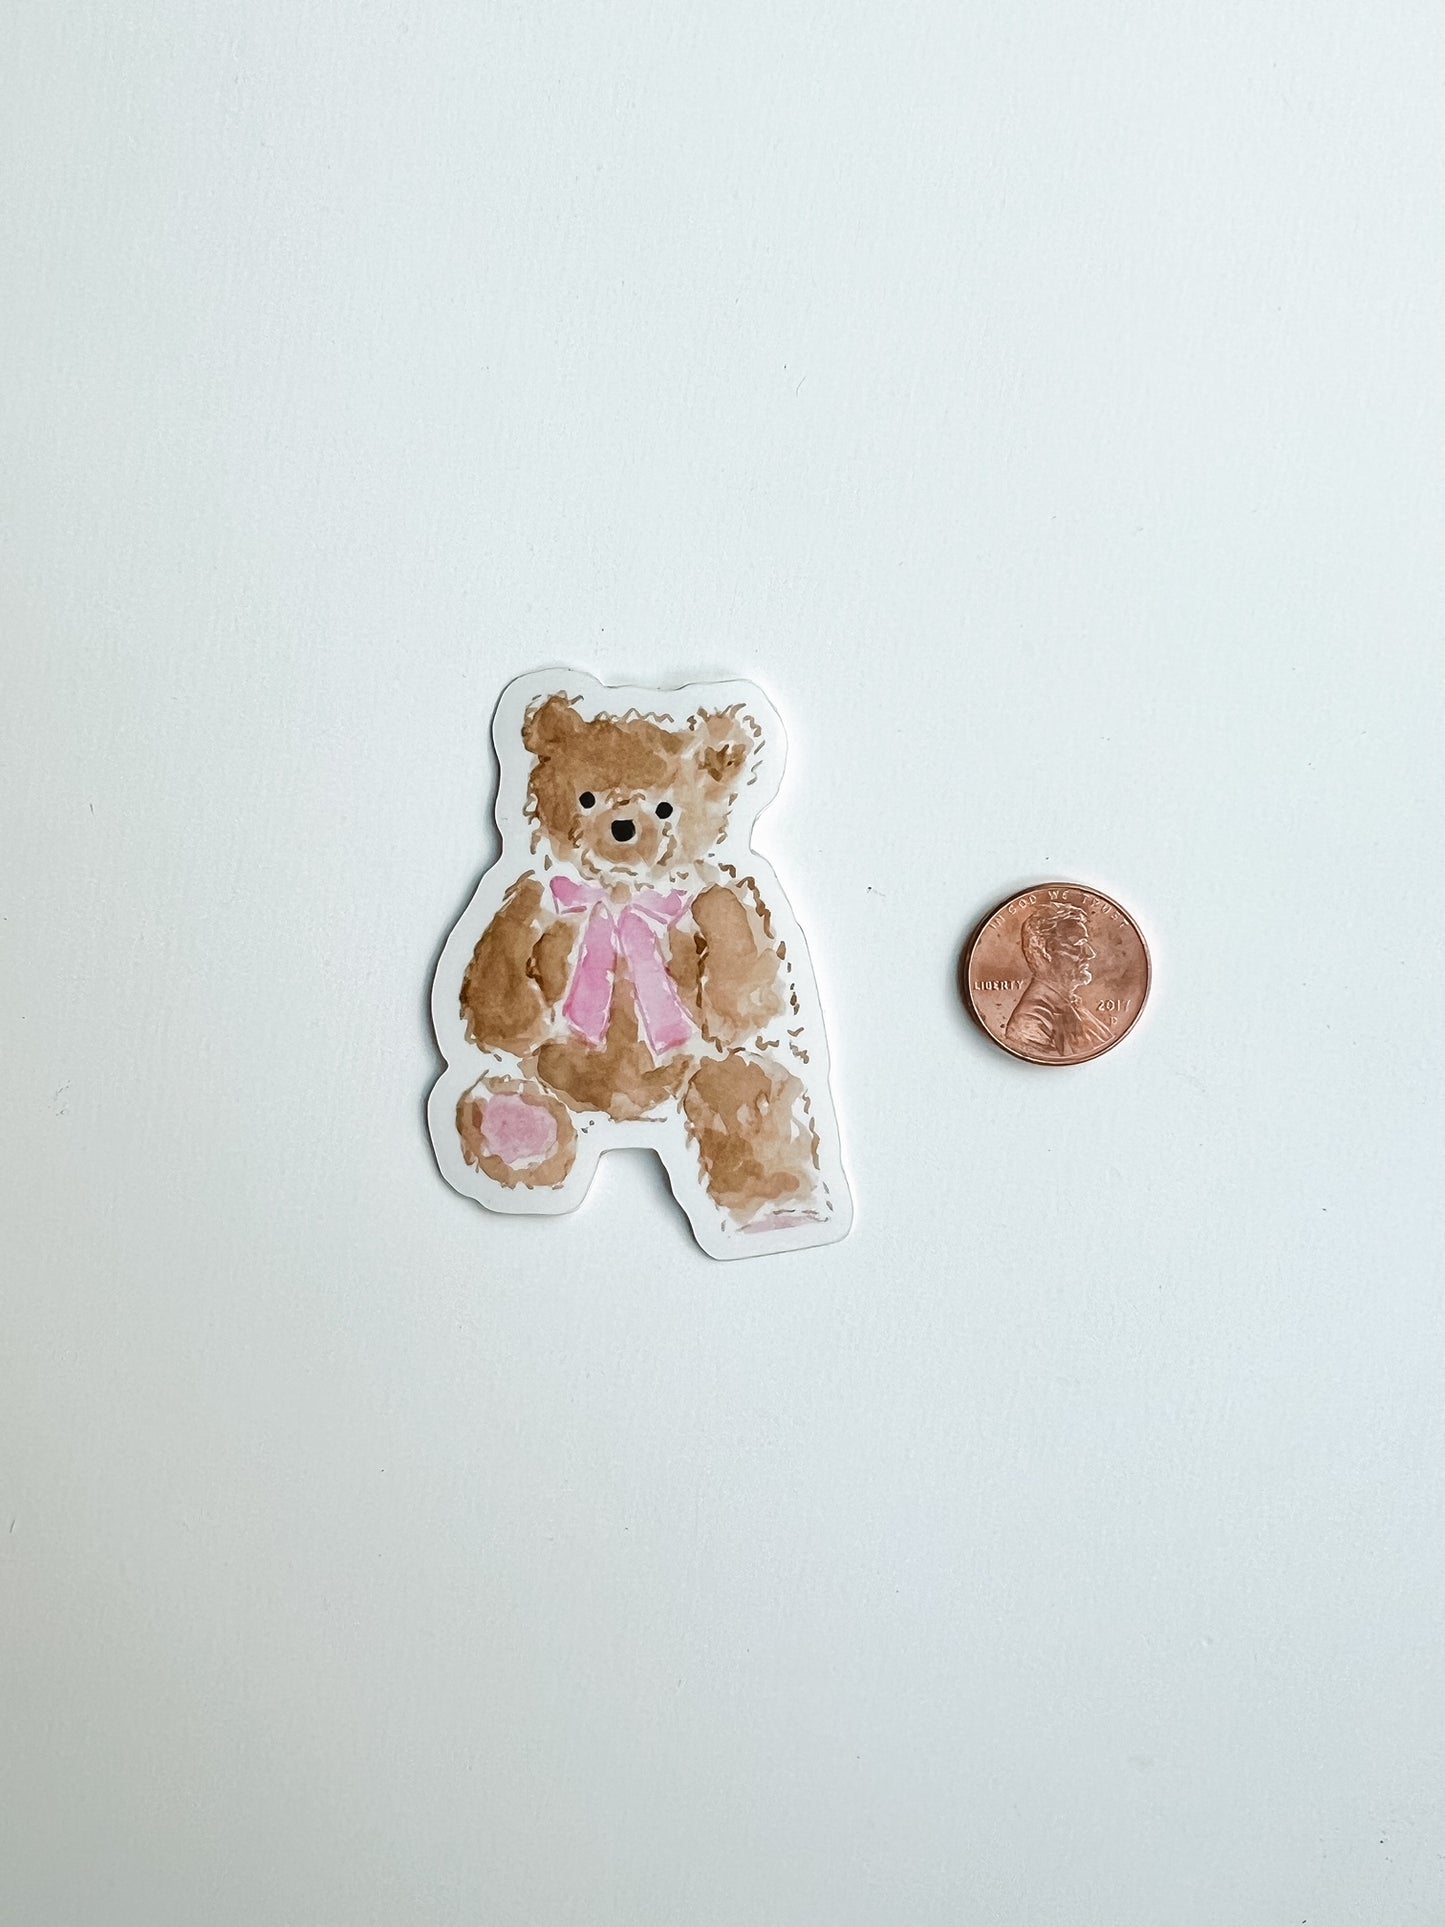 Watercolor teddy bear sticker with pink bow